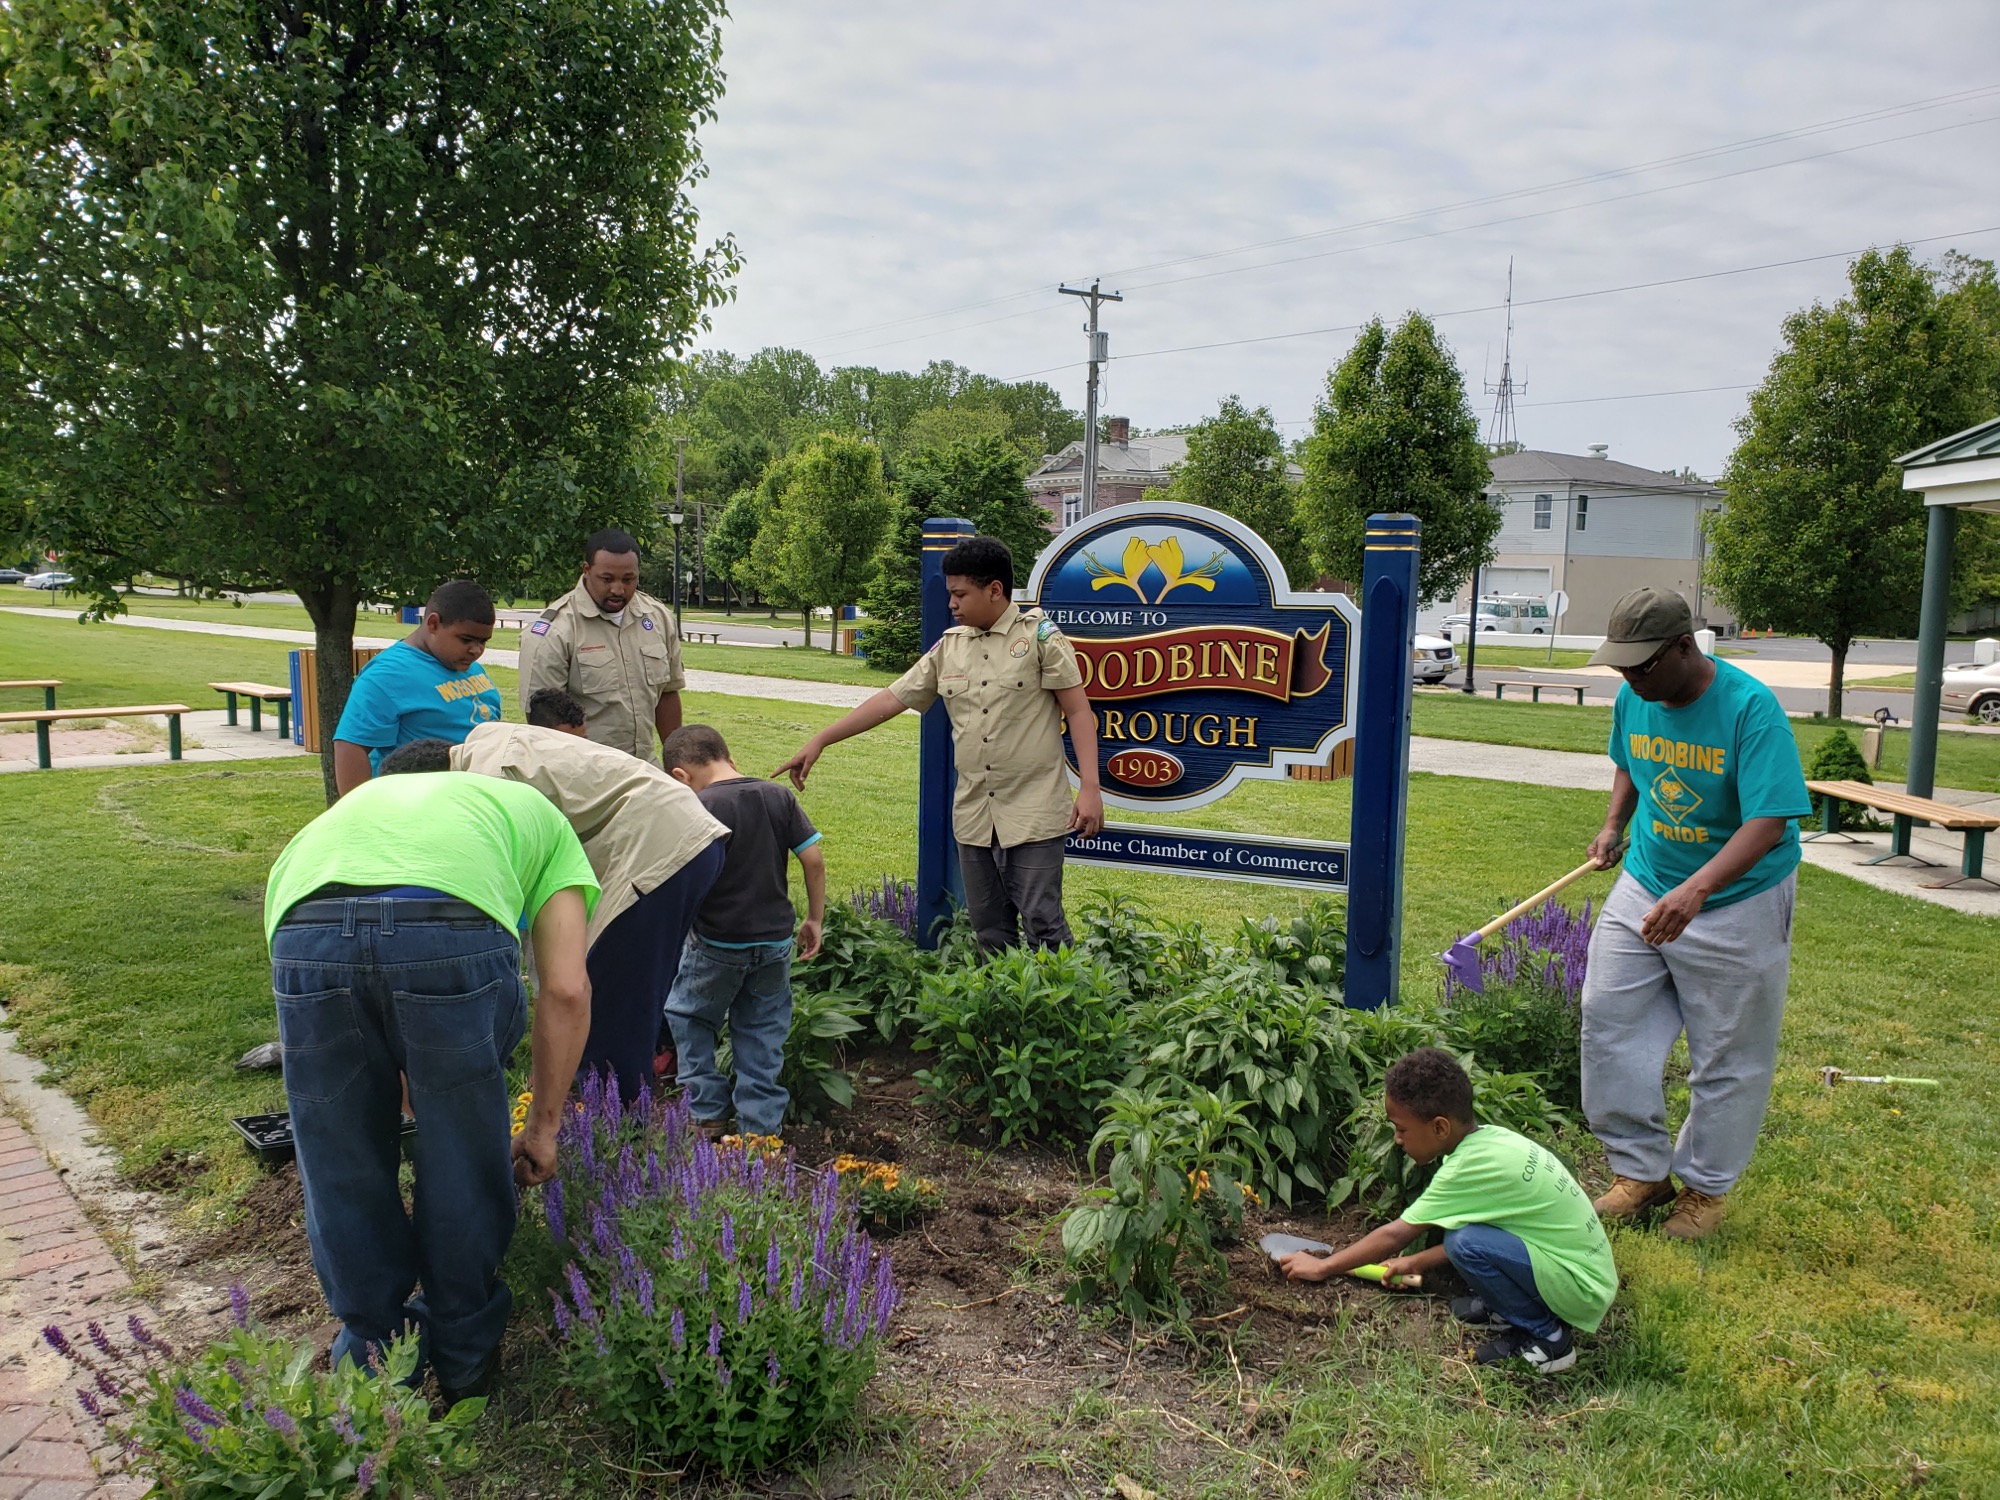 Woodbine Boy and Cub Scout Troops 77 plant flowers to help beautify the borough.